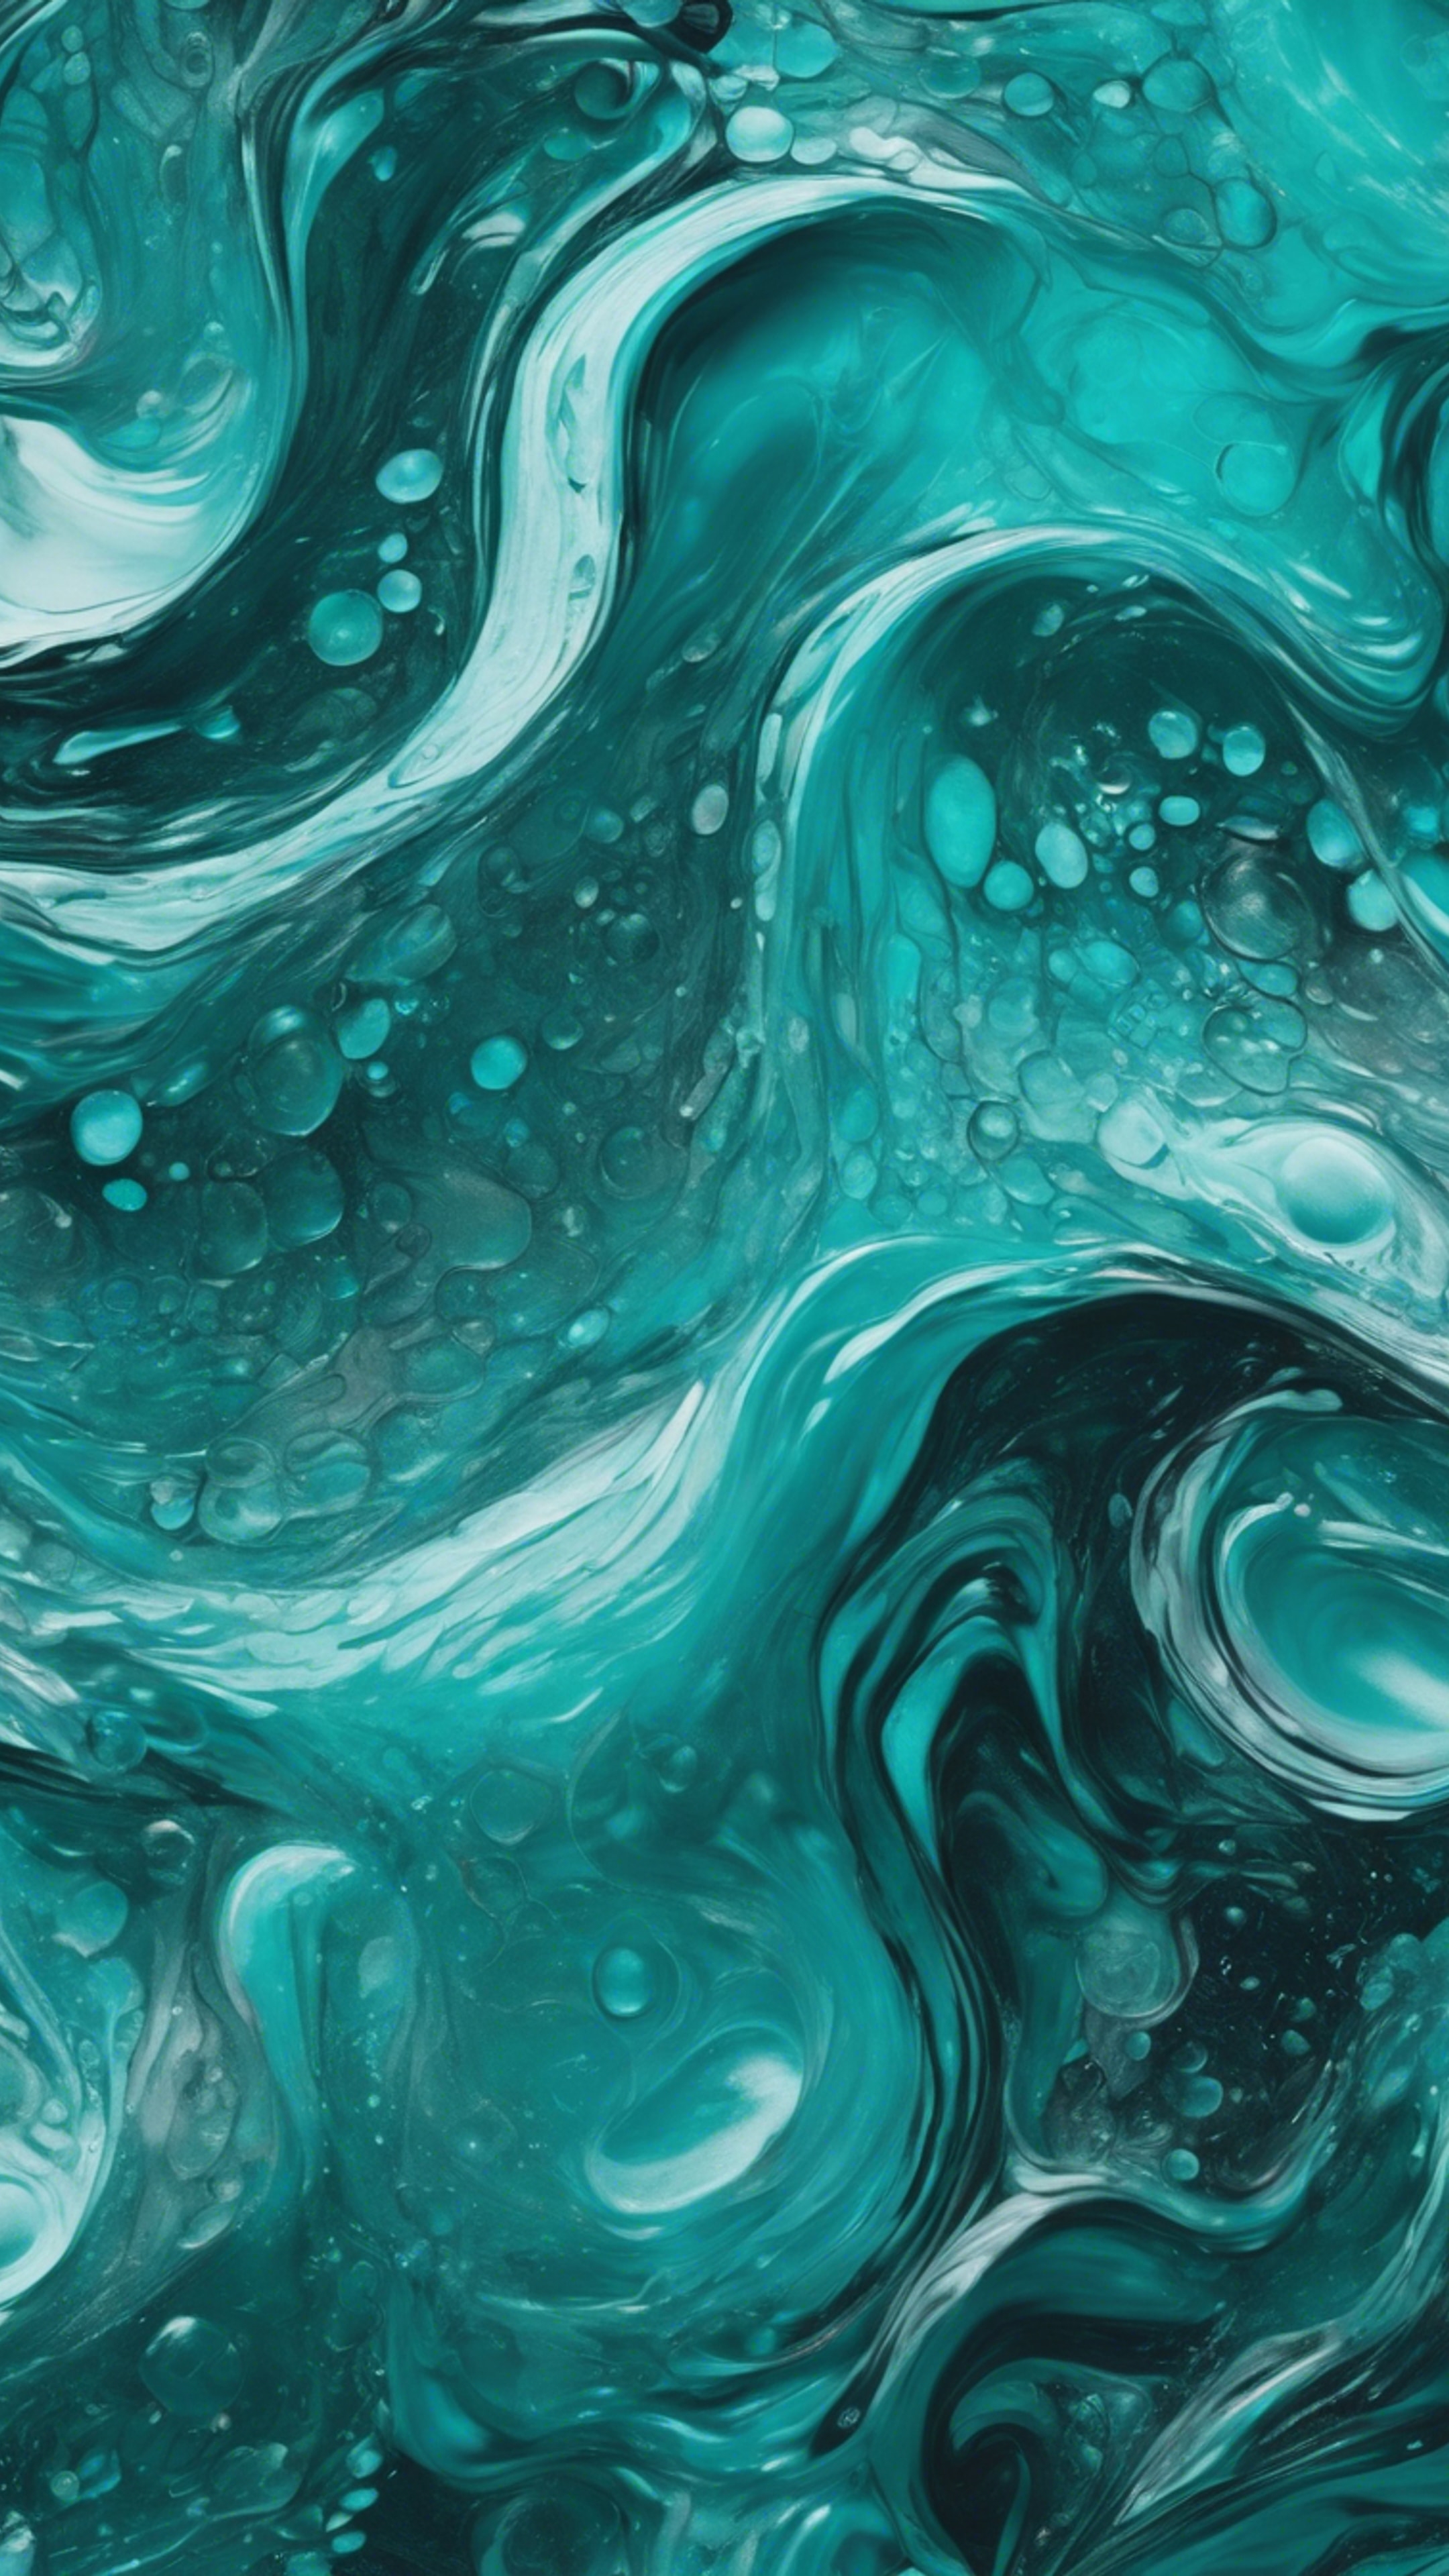 Abstract painting with swirling waves of shades of cool teal. טפט[053c1b1ade8044ef8a45]